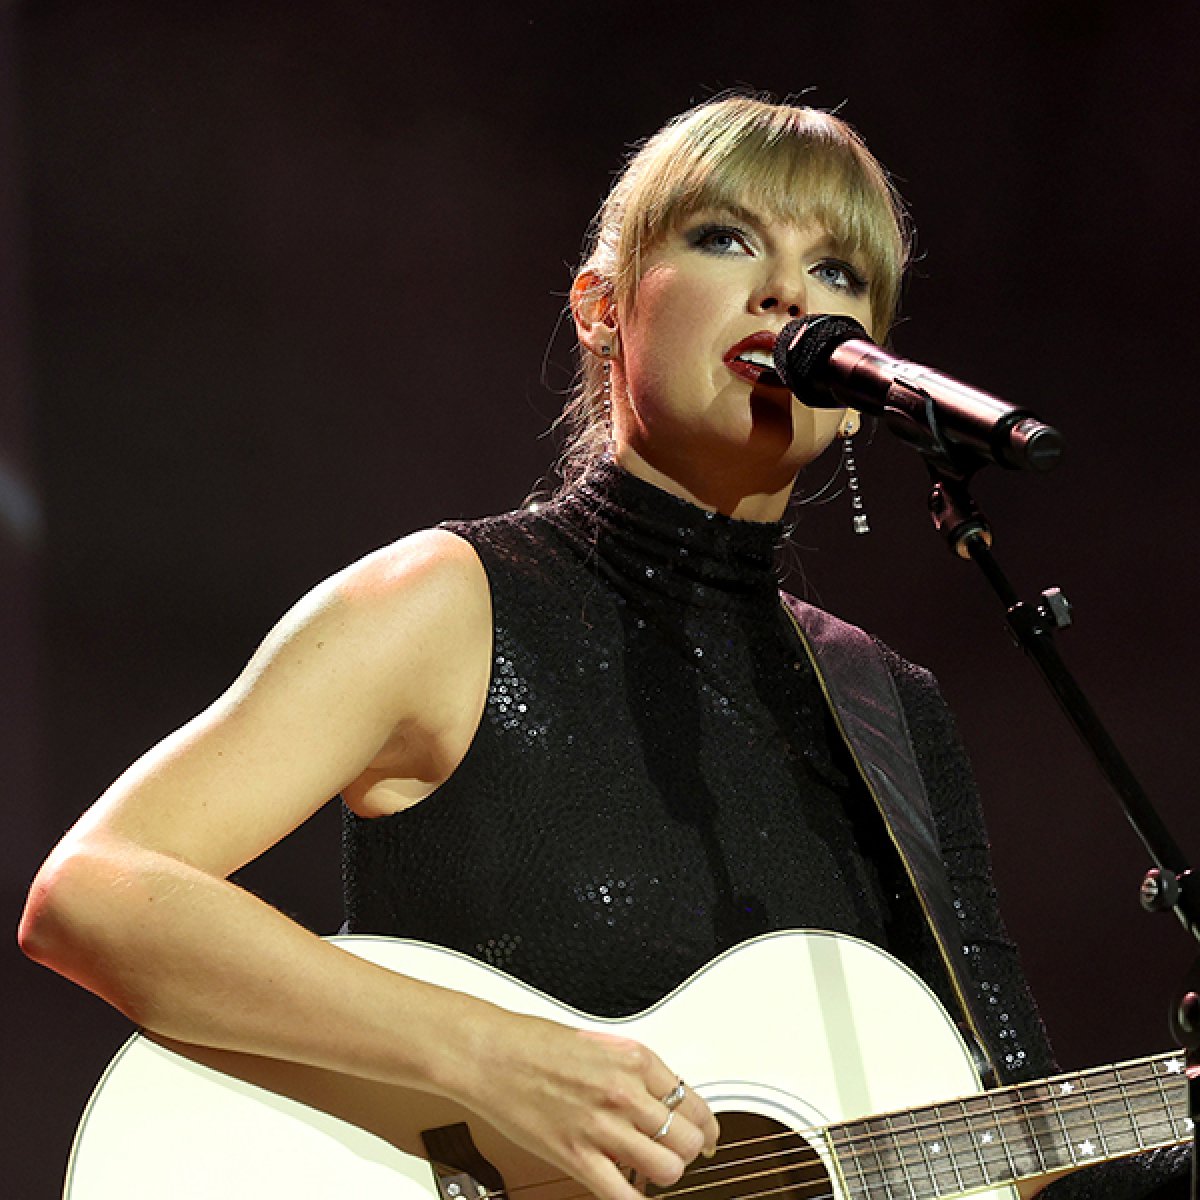 Bands Pan Taylor Swift's 'Midnights,' but Is She to Blame for Vinyl Delays?